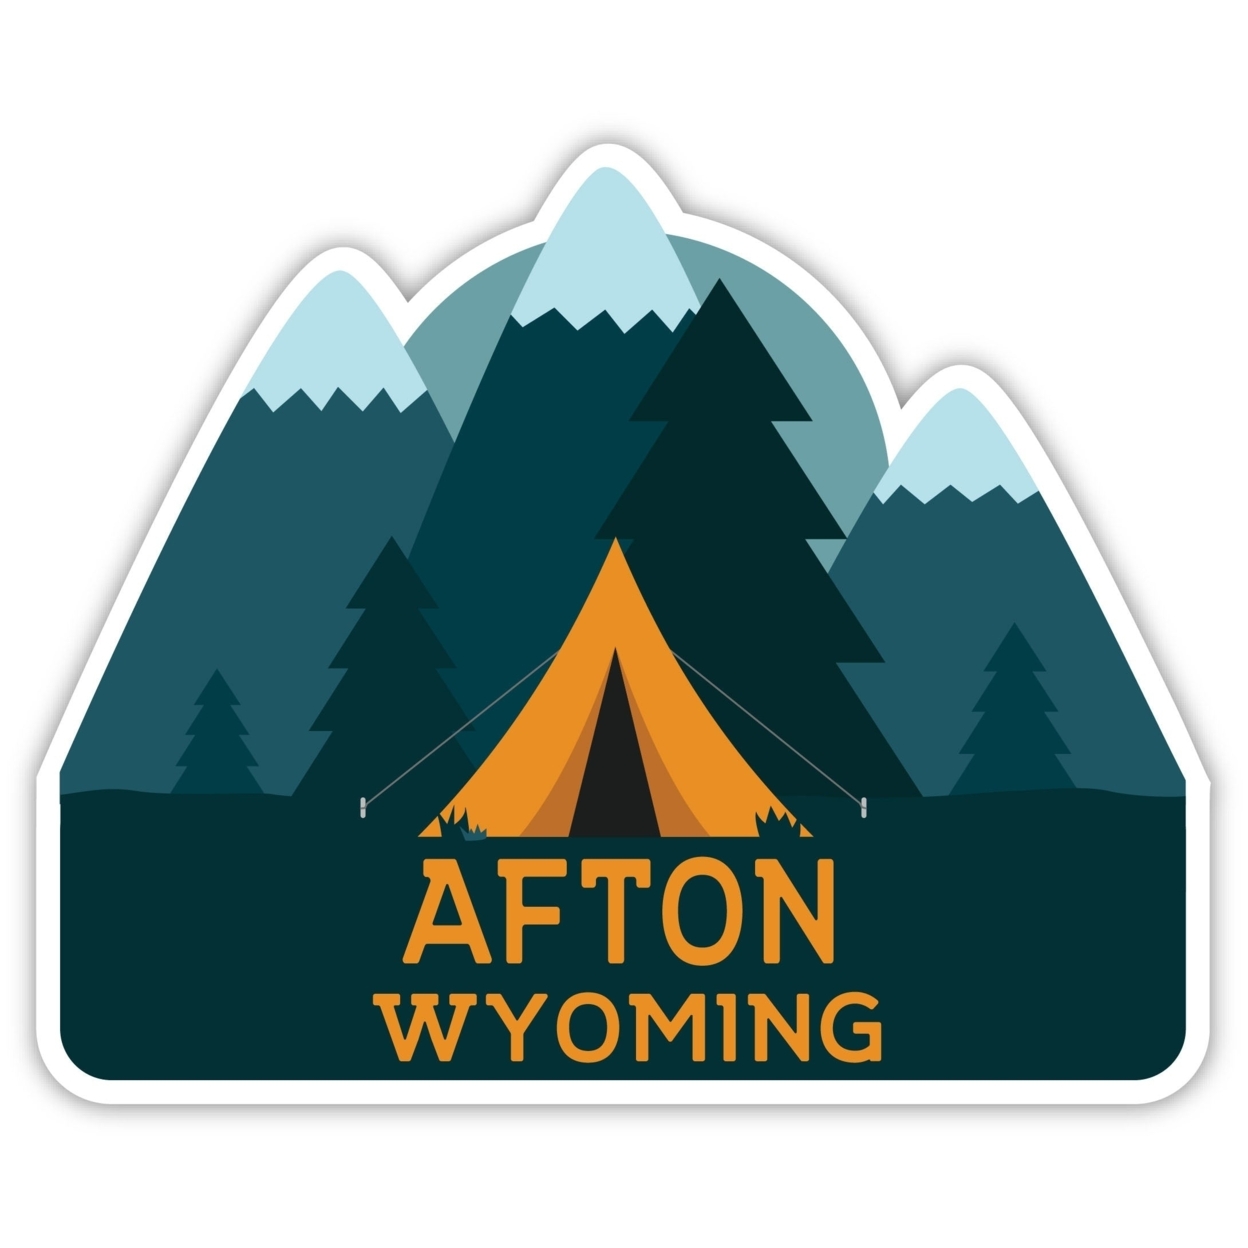 Afton Wyoming Souvenir Decorative Stickers (Choose Theme And Size) - Single Unit, 6-Inch, Tent